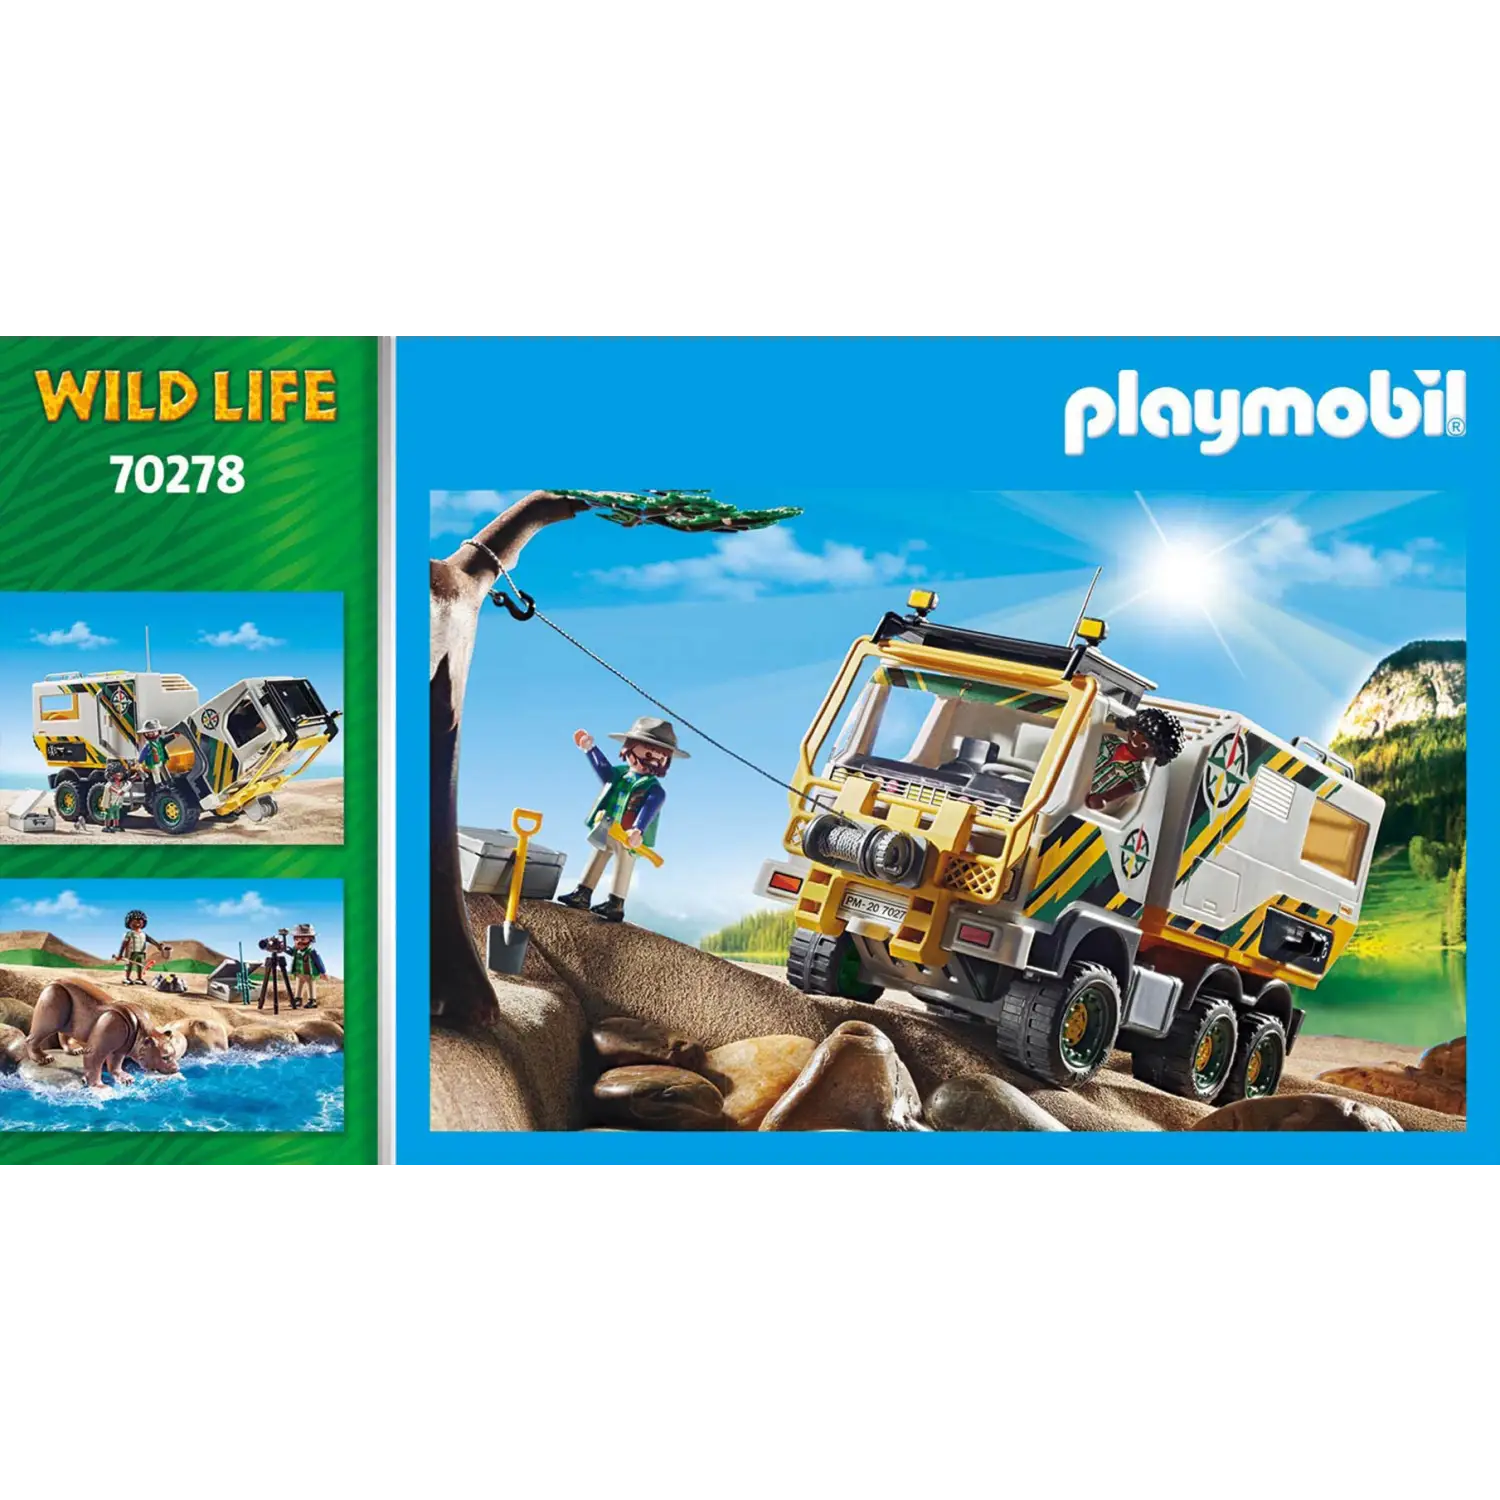 Playmobil Wild Life - Outdoor Expedition Truck 70278 (for